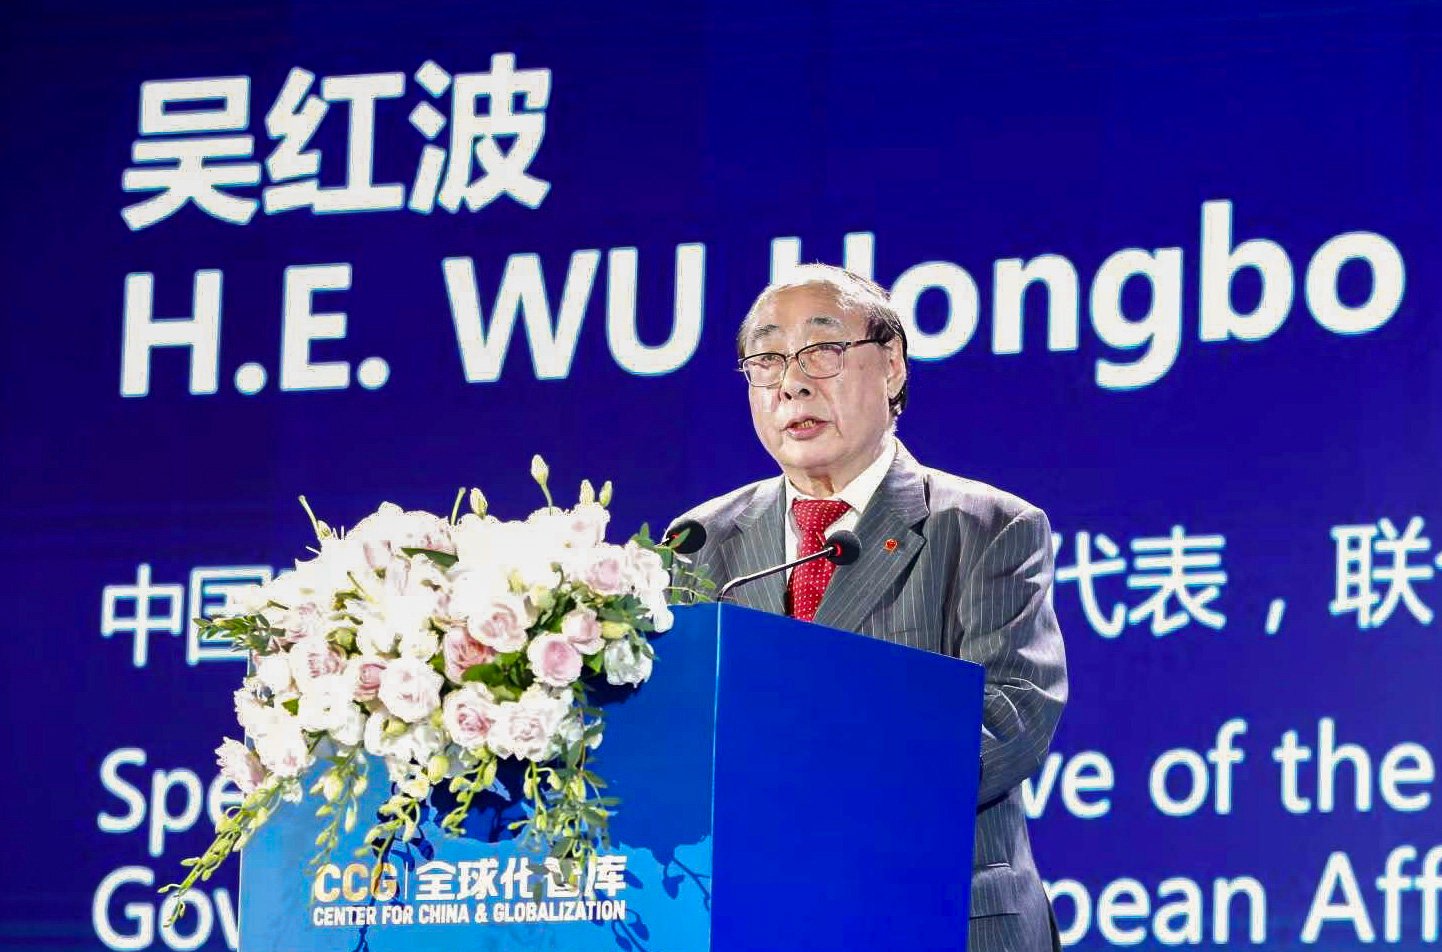 “A world of turbulence and change requires Europe to strengthen its strategic autonomy,” Beijing envoy and former UN deputy secretary general Wu Hongbo says. Photo: Weibo